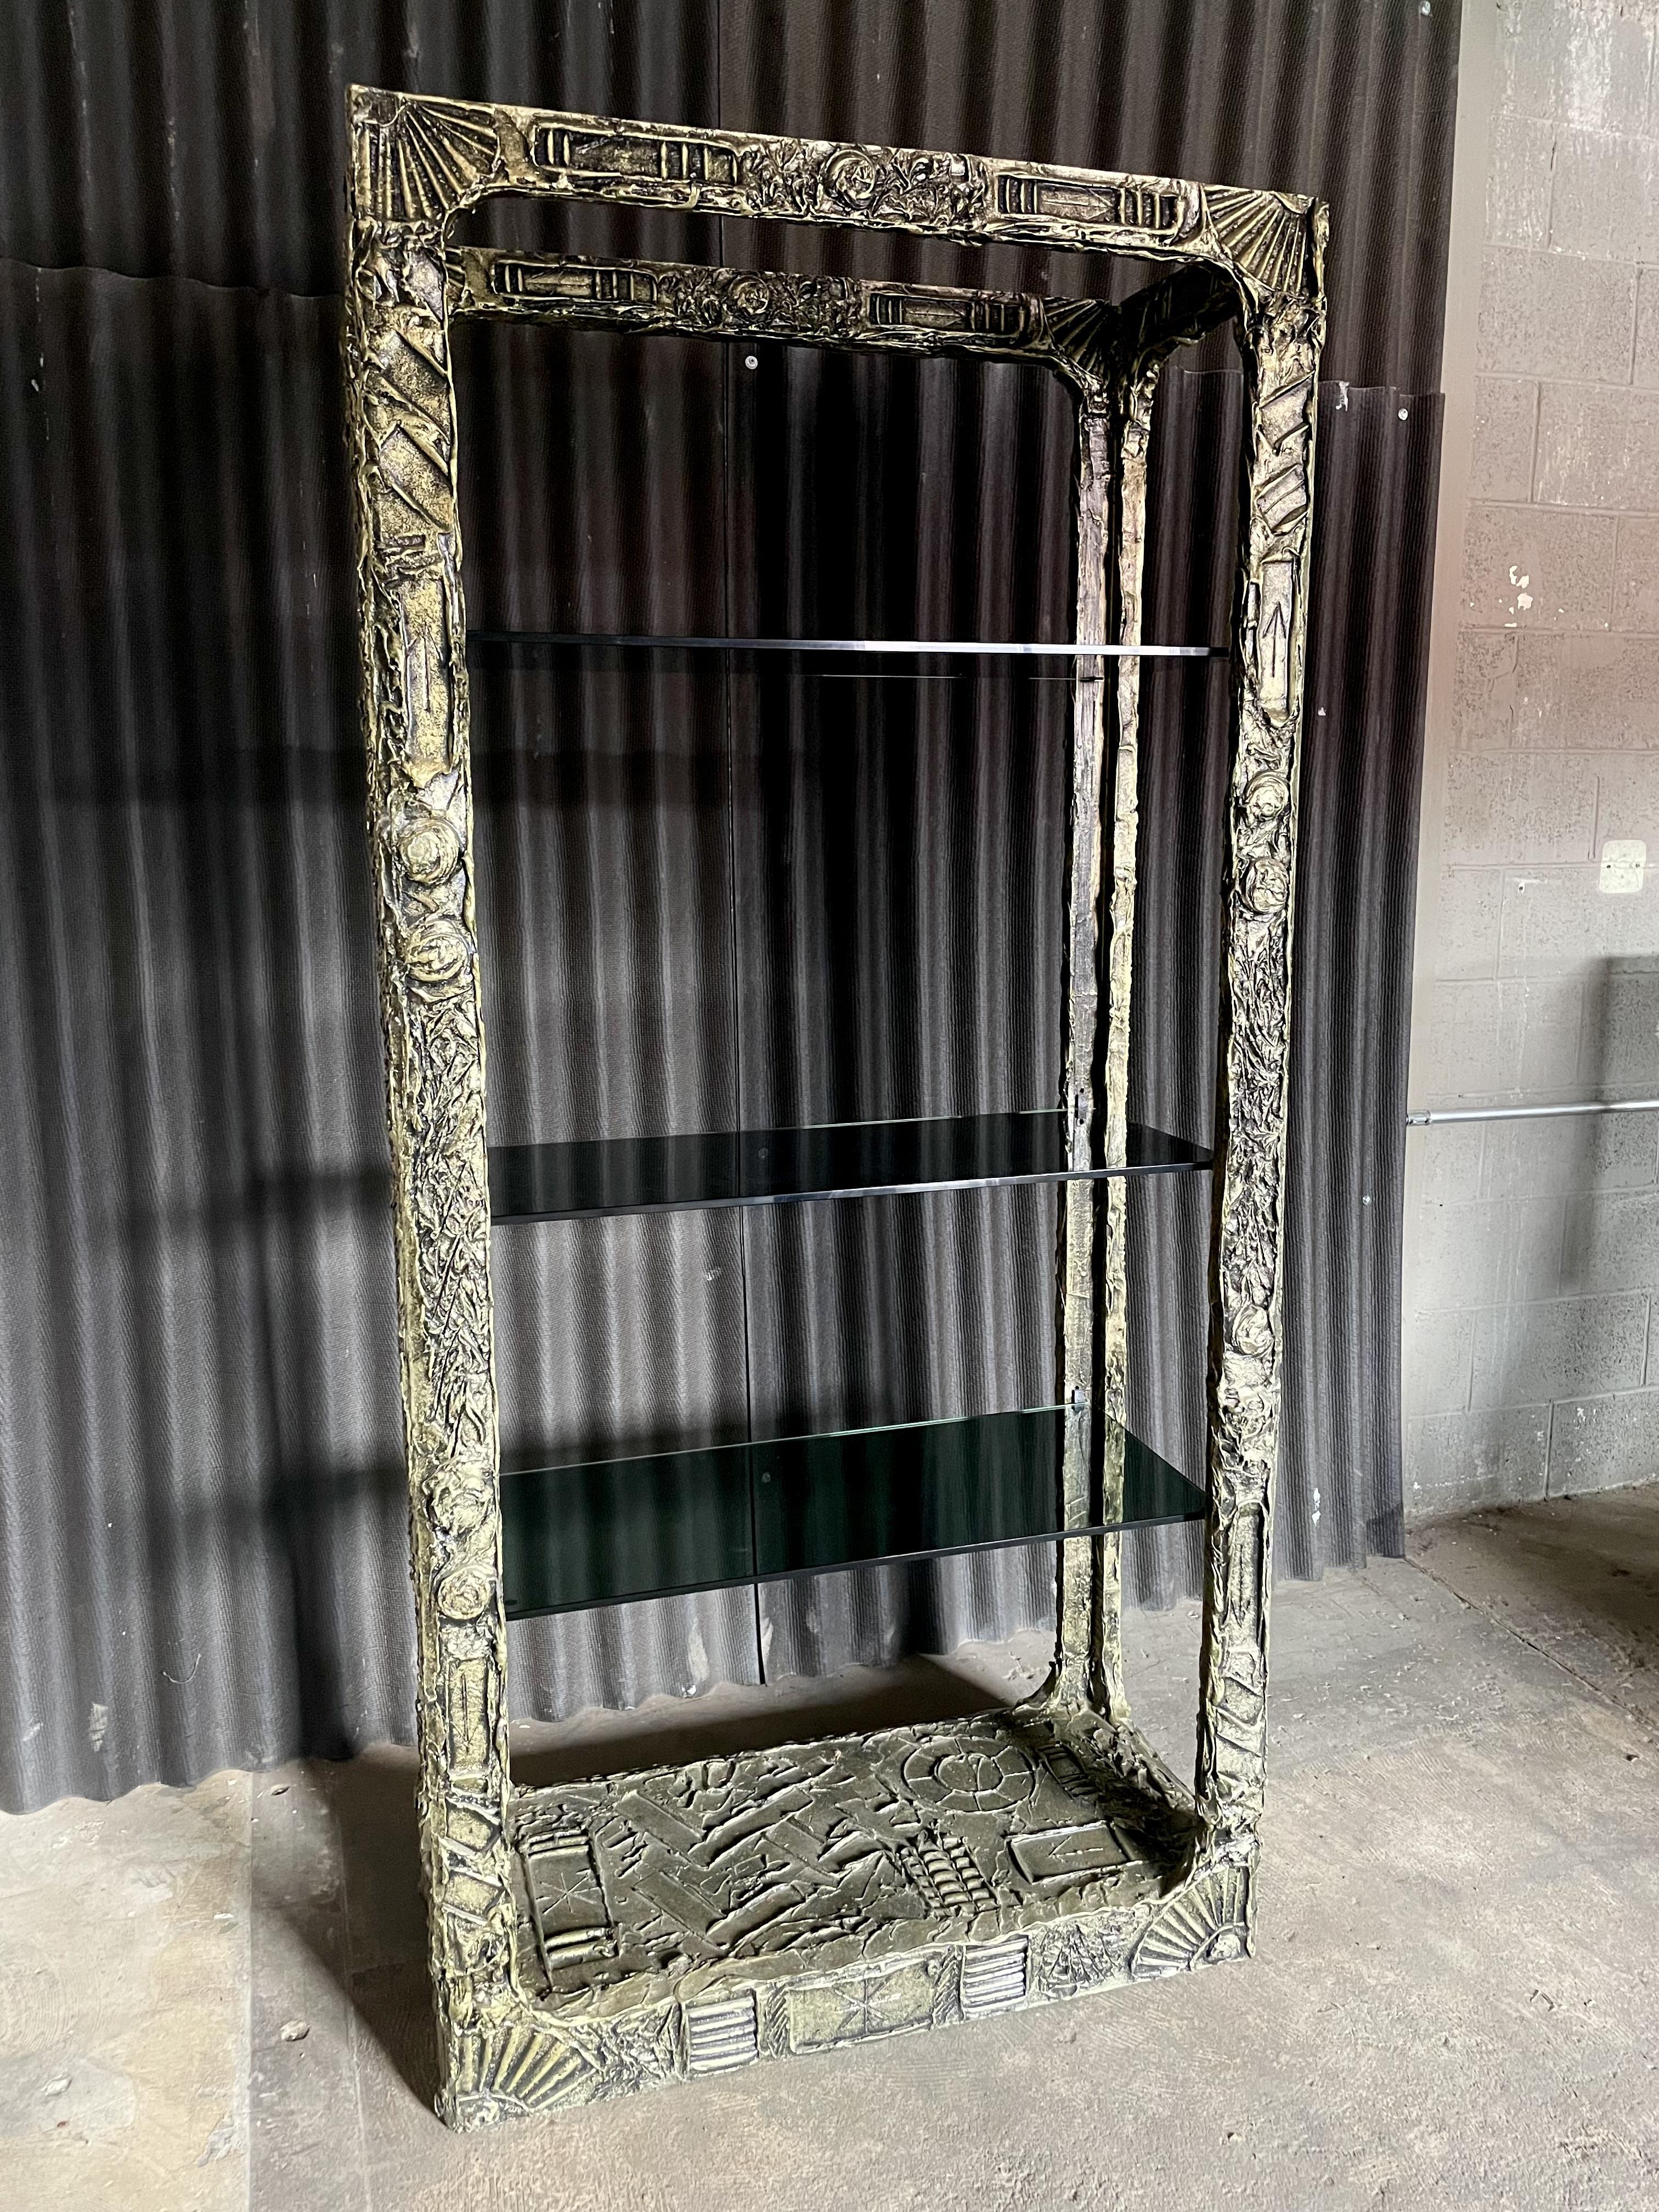 Gorgeous Etagere by Designer, Adrian Pearsall.
This particular Etagere is in wonderful condition with no broken pieces.

The resin is intact and is stunning.
The glass is original and the grey tint perfectly highlights the resin.

Unit is strong and